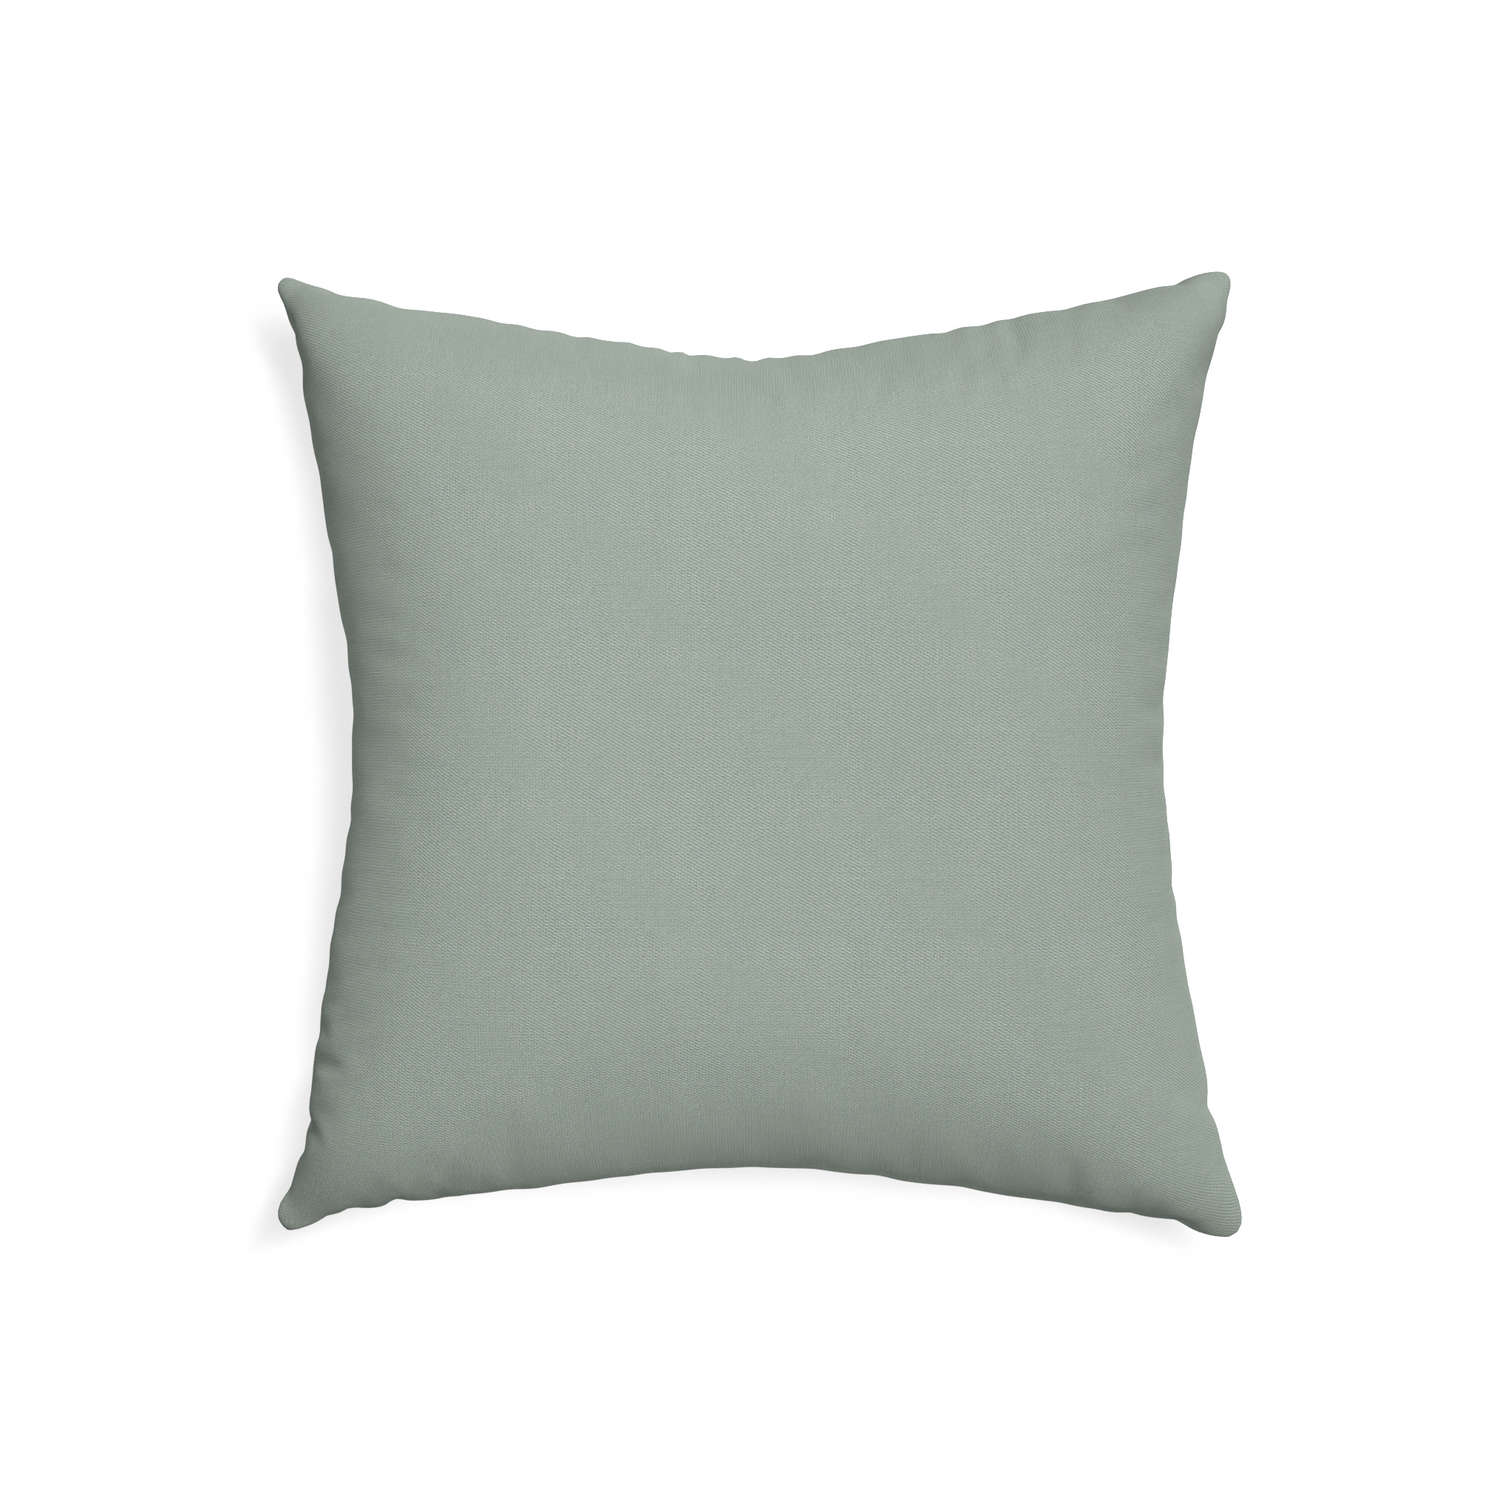 22-square sage custom sage green cottonpillow with none on white background